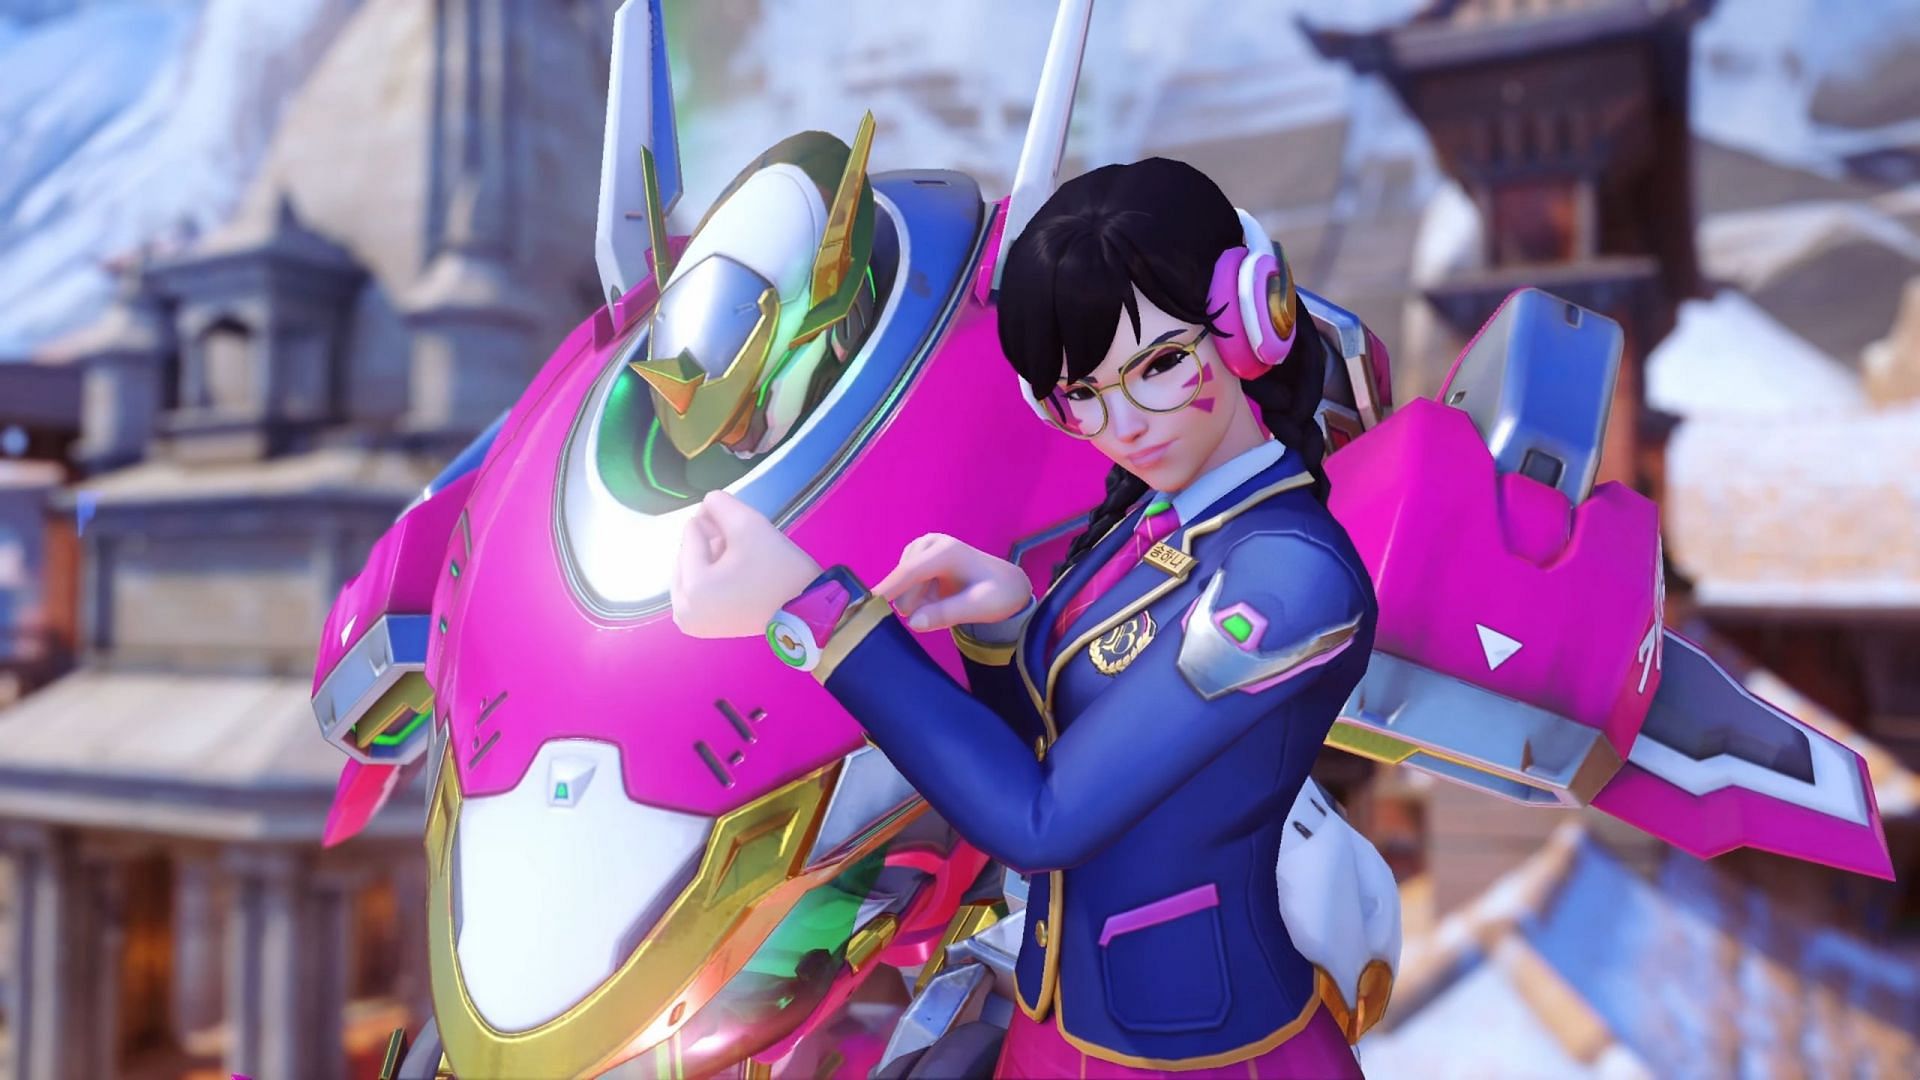 Academy D.Va is one of the best D.Va skins (Image via CyFyGG/YouTube, Blizzard Entertainment)